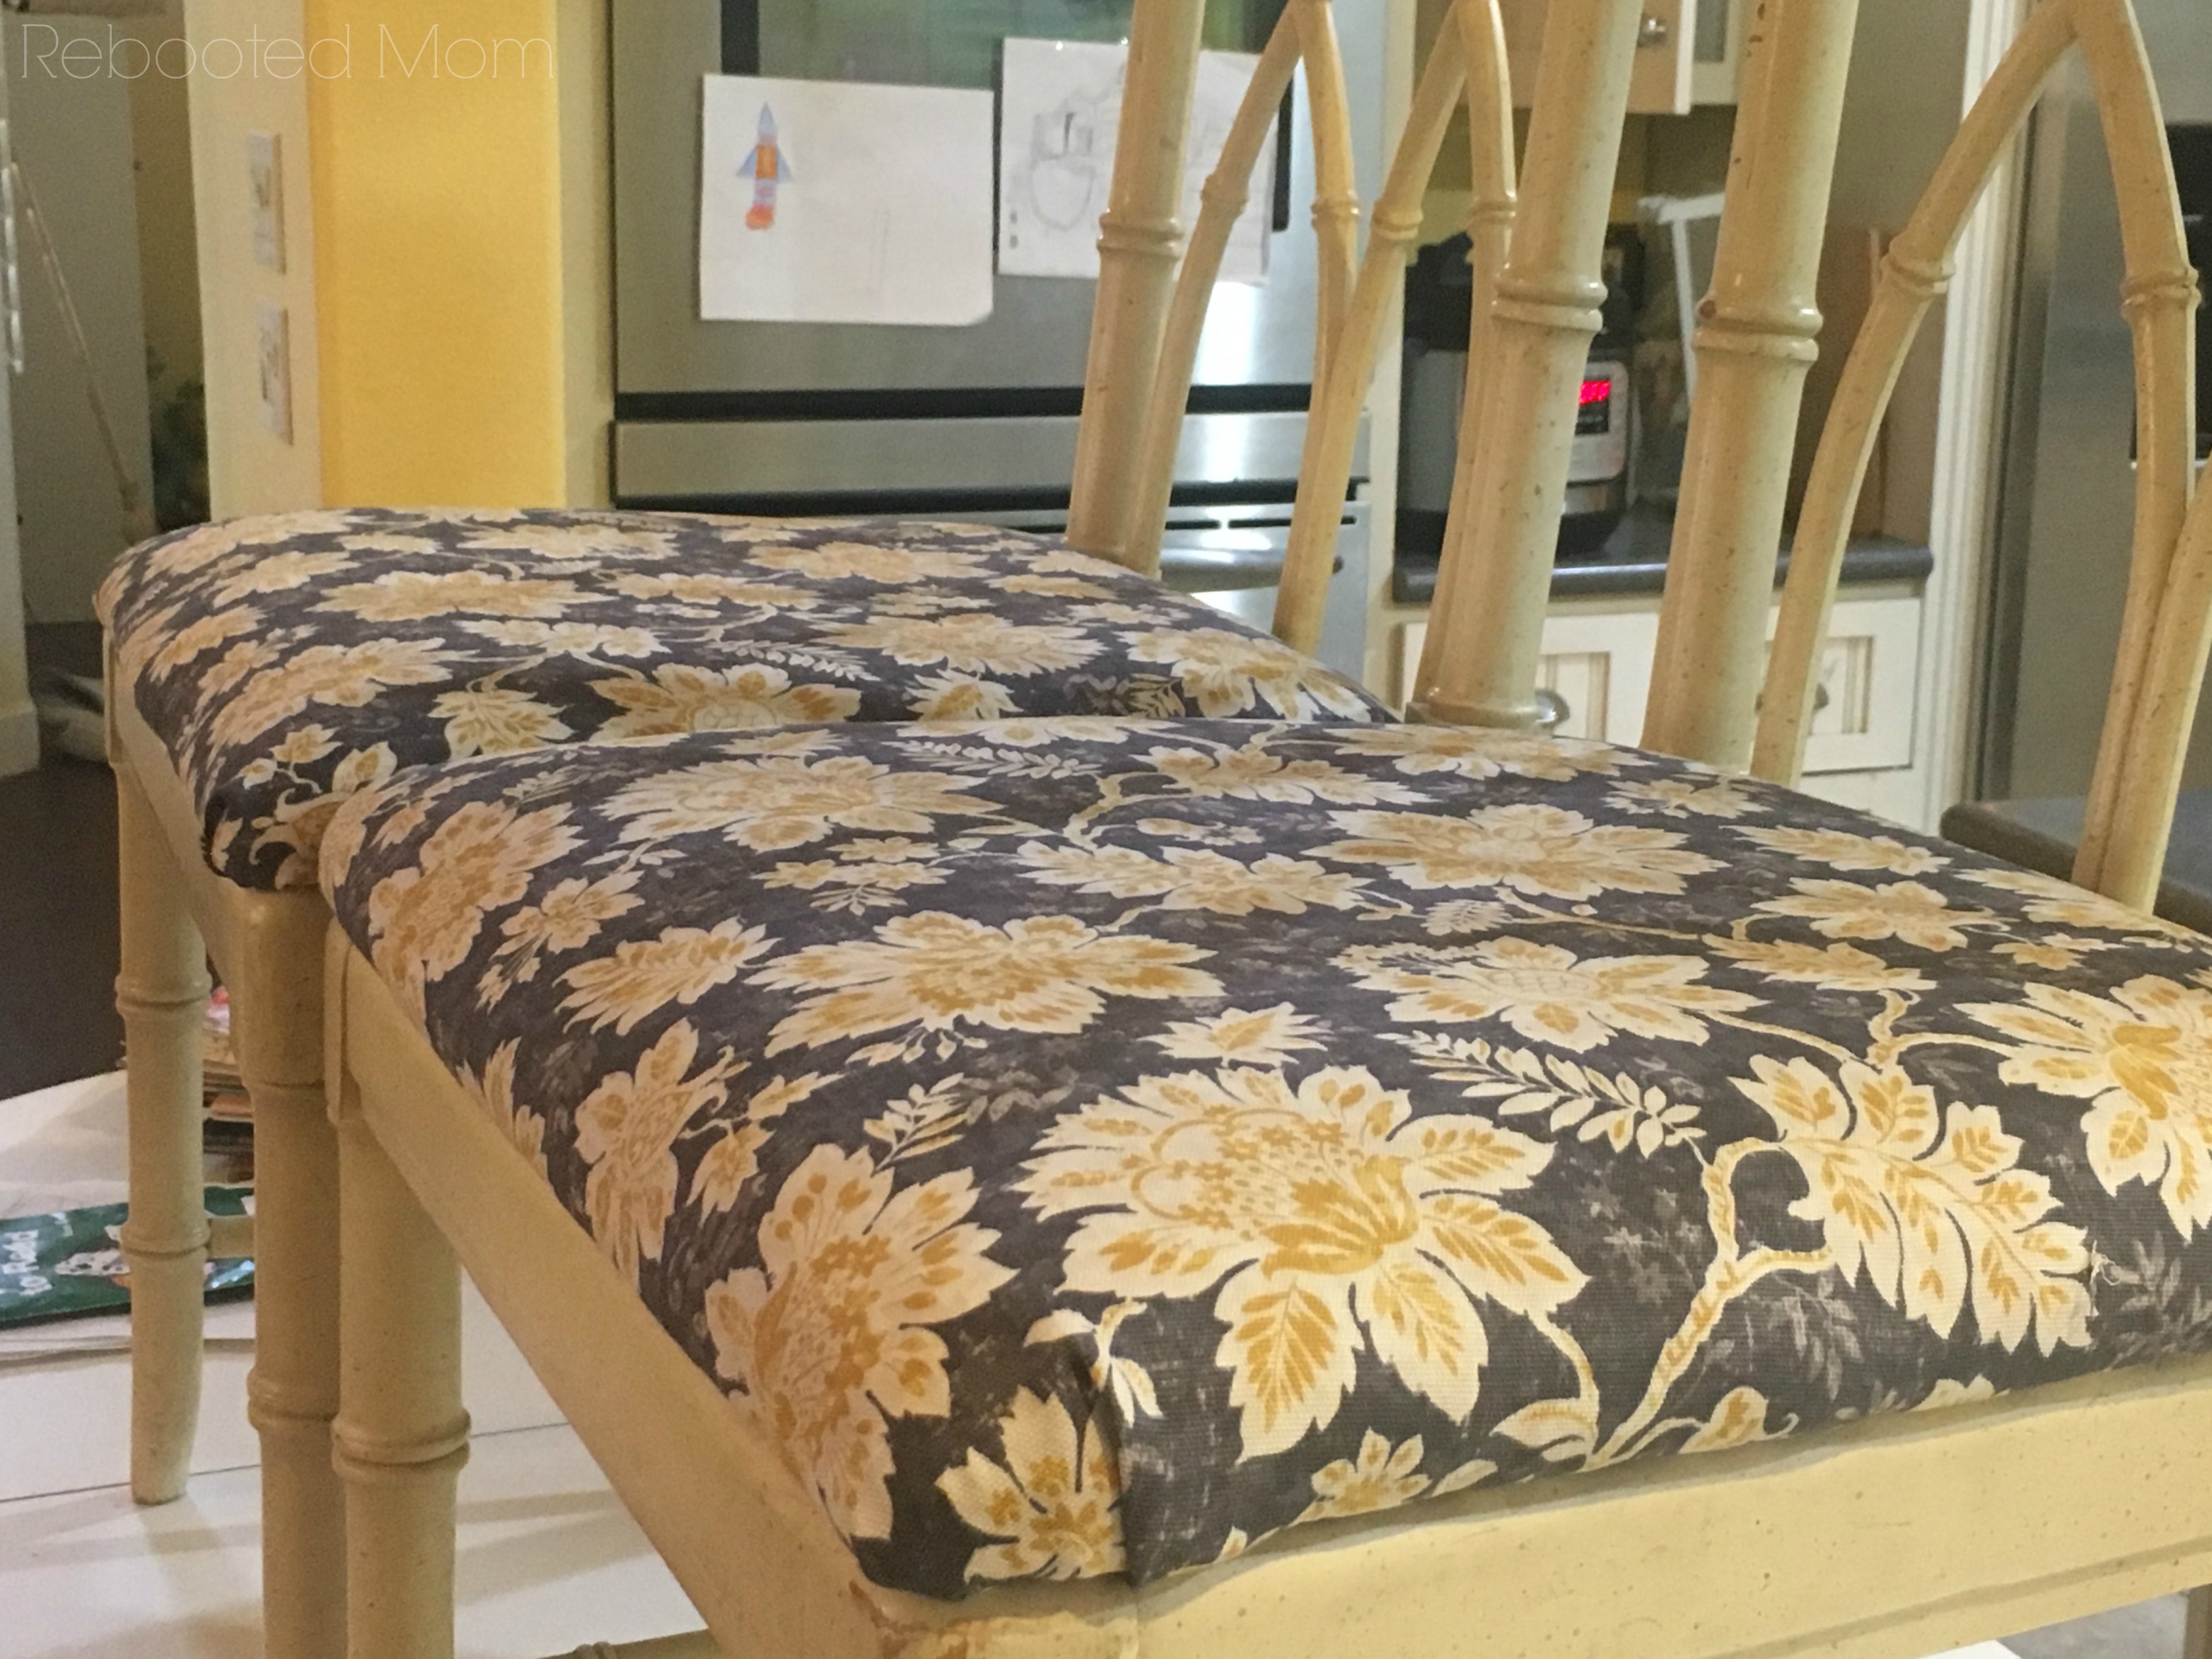 With a little DIY know-how, and a few simple supplies and tools, you can transform ugly dining chairs into beautiful pieces. Here's how to recover chair seat cushions yourself.